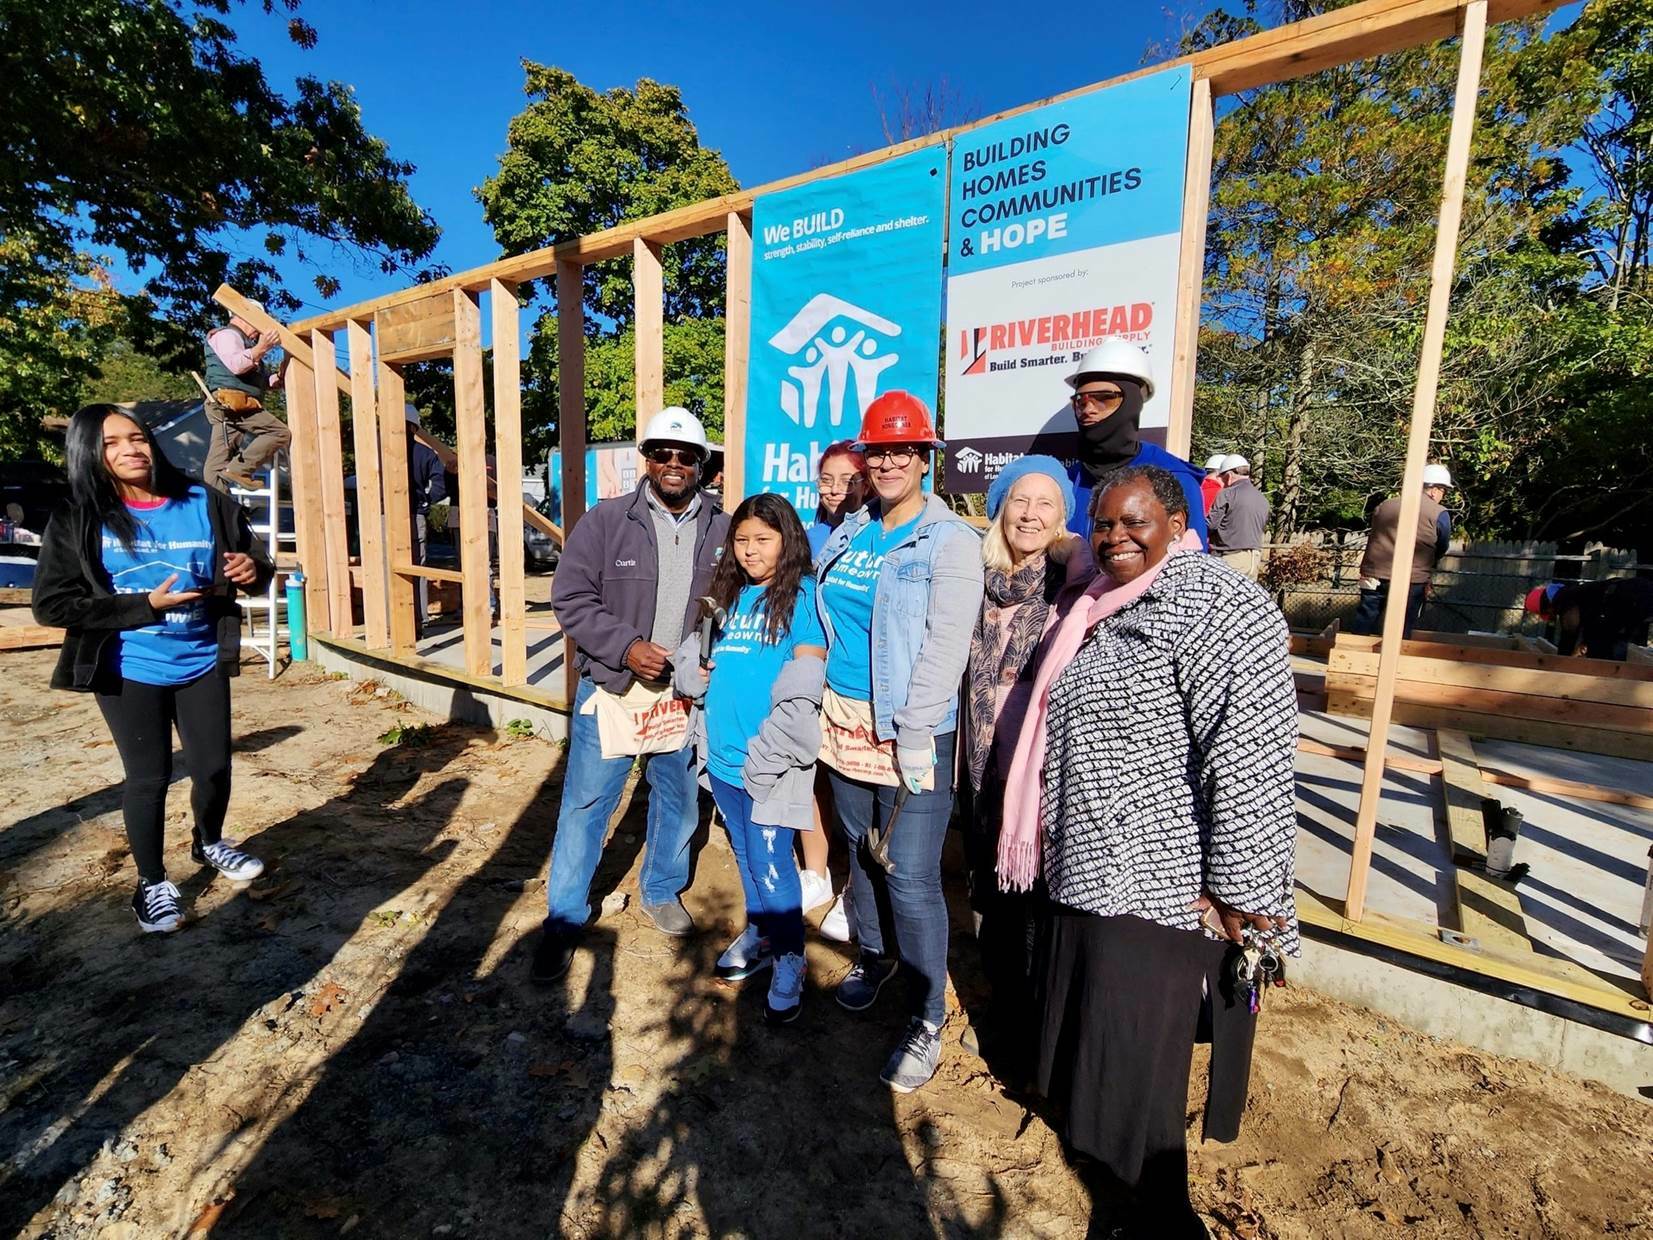 The Town of Southampton Housing Authority and Habitat for Humanity have opened a new application period for affordable homes in Riverside. COURTESY TOWN OF SOUTHAMPTON HOUSING AUTHORITY